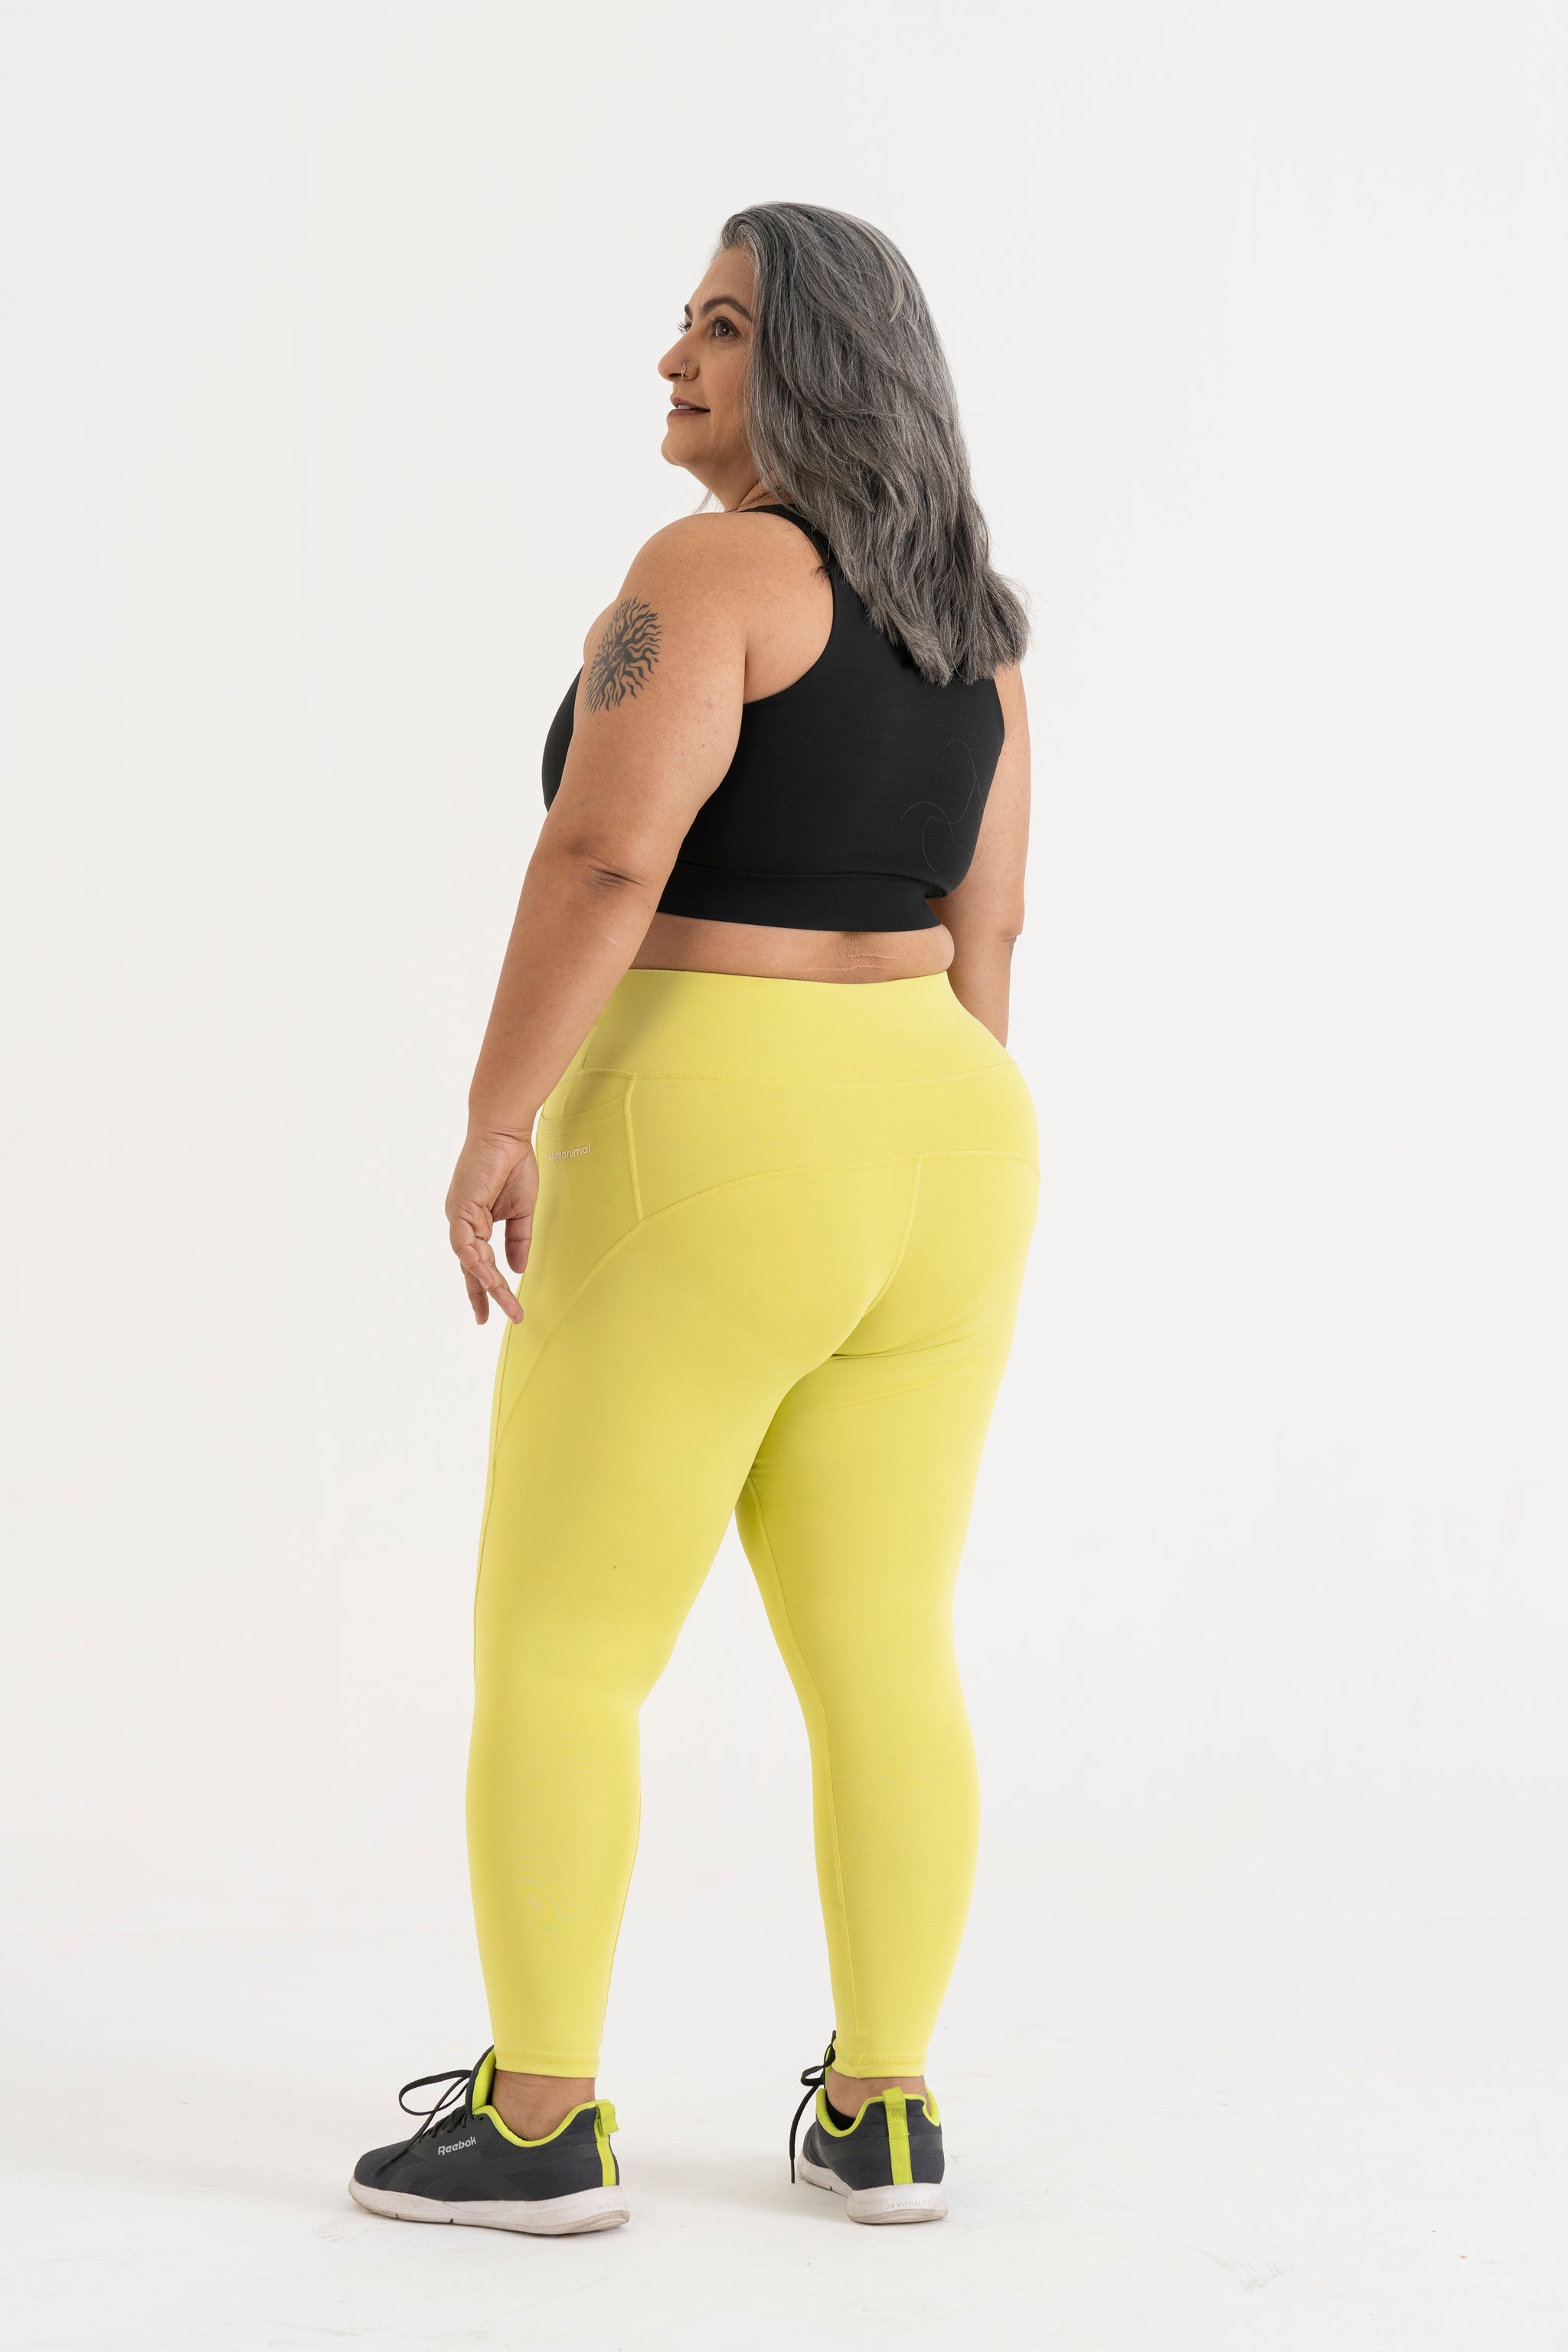 Plus Size Legging Outfits for Curvy Gals Over 40